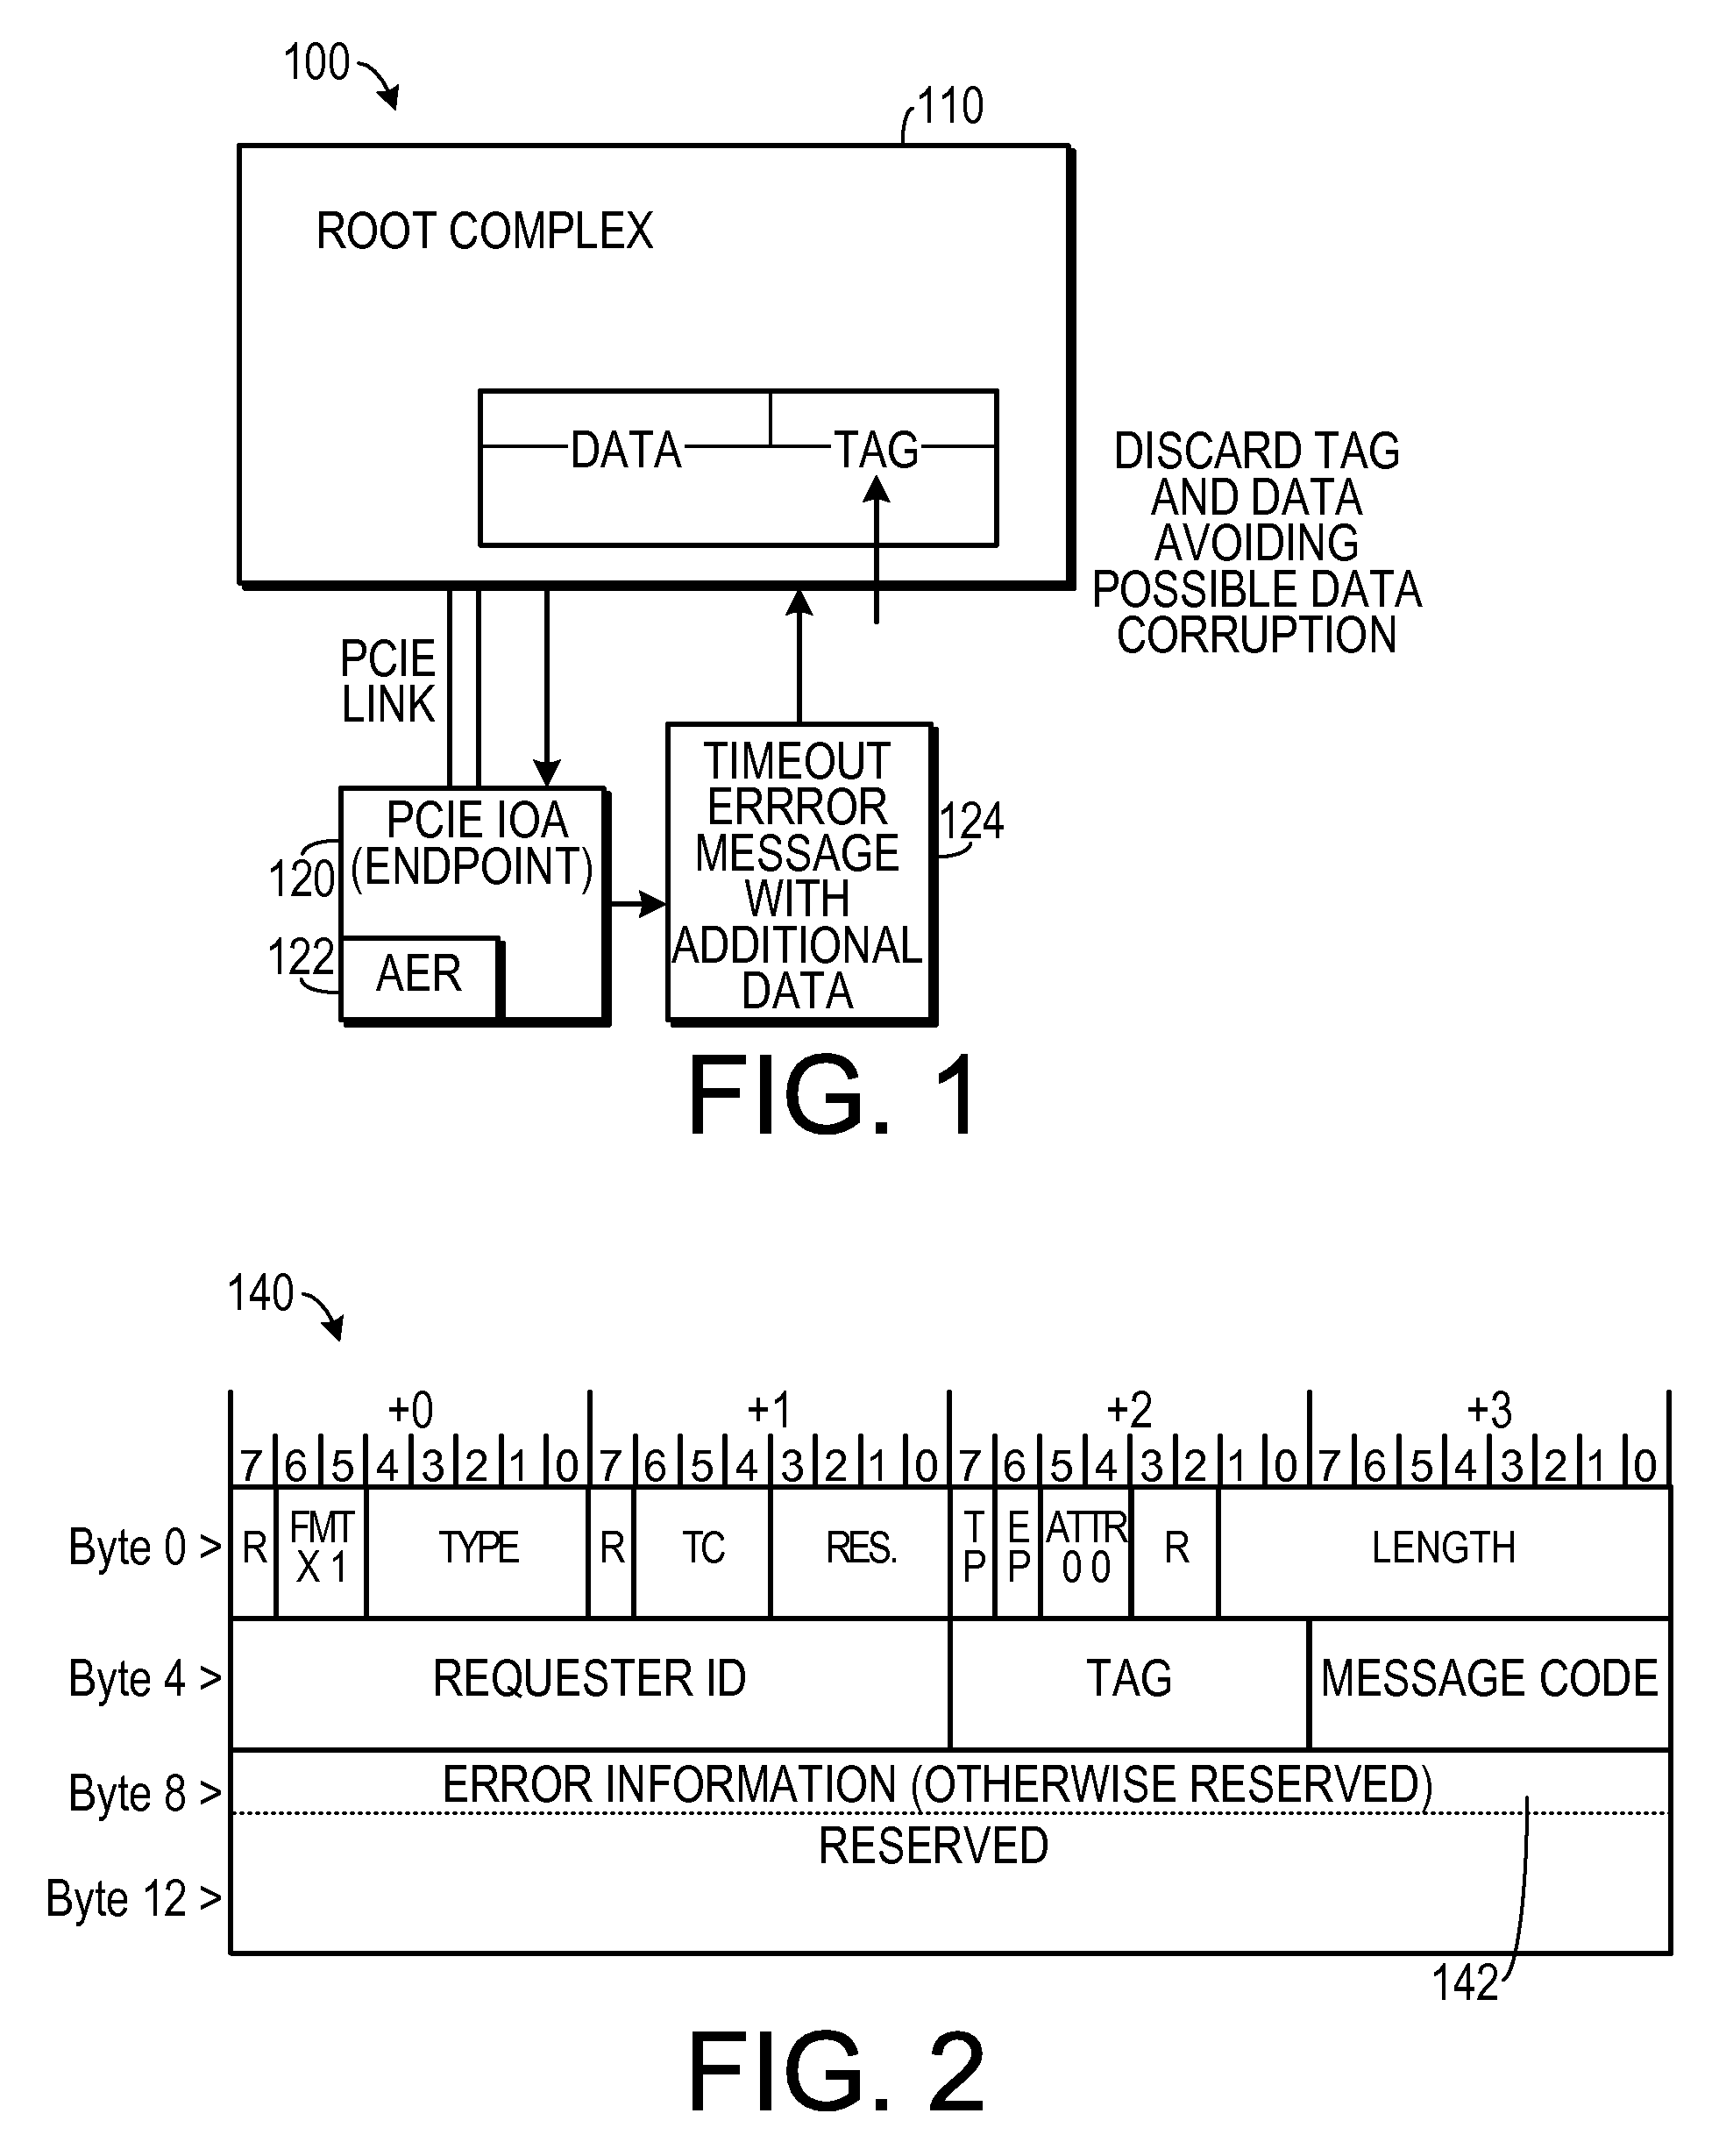 Method for Correlating an Error Message From a PCI Express Endpoint